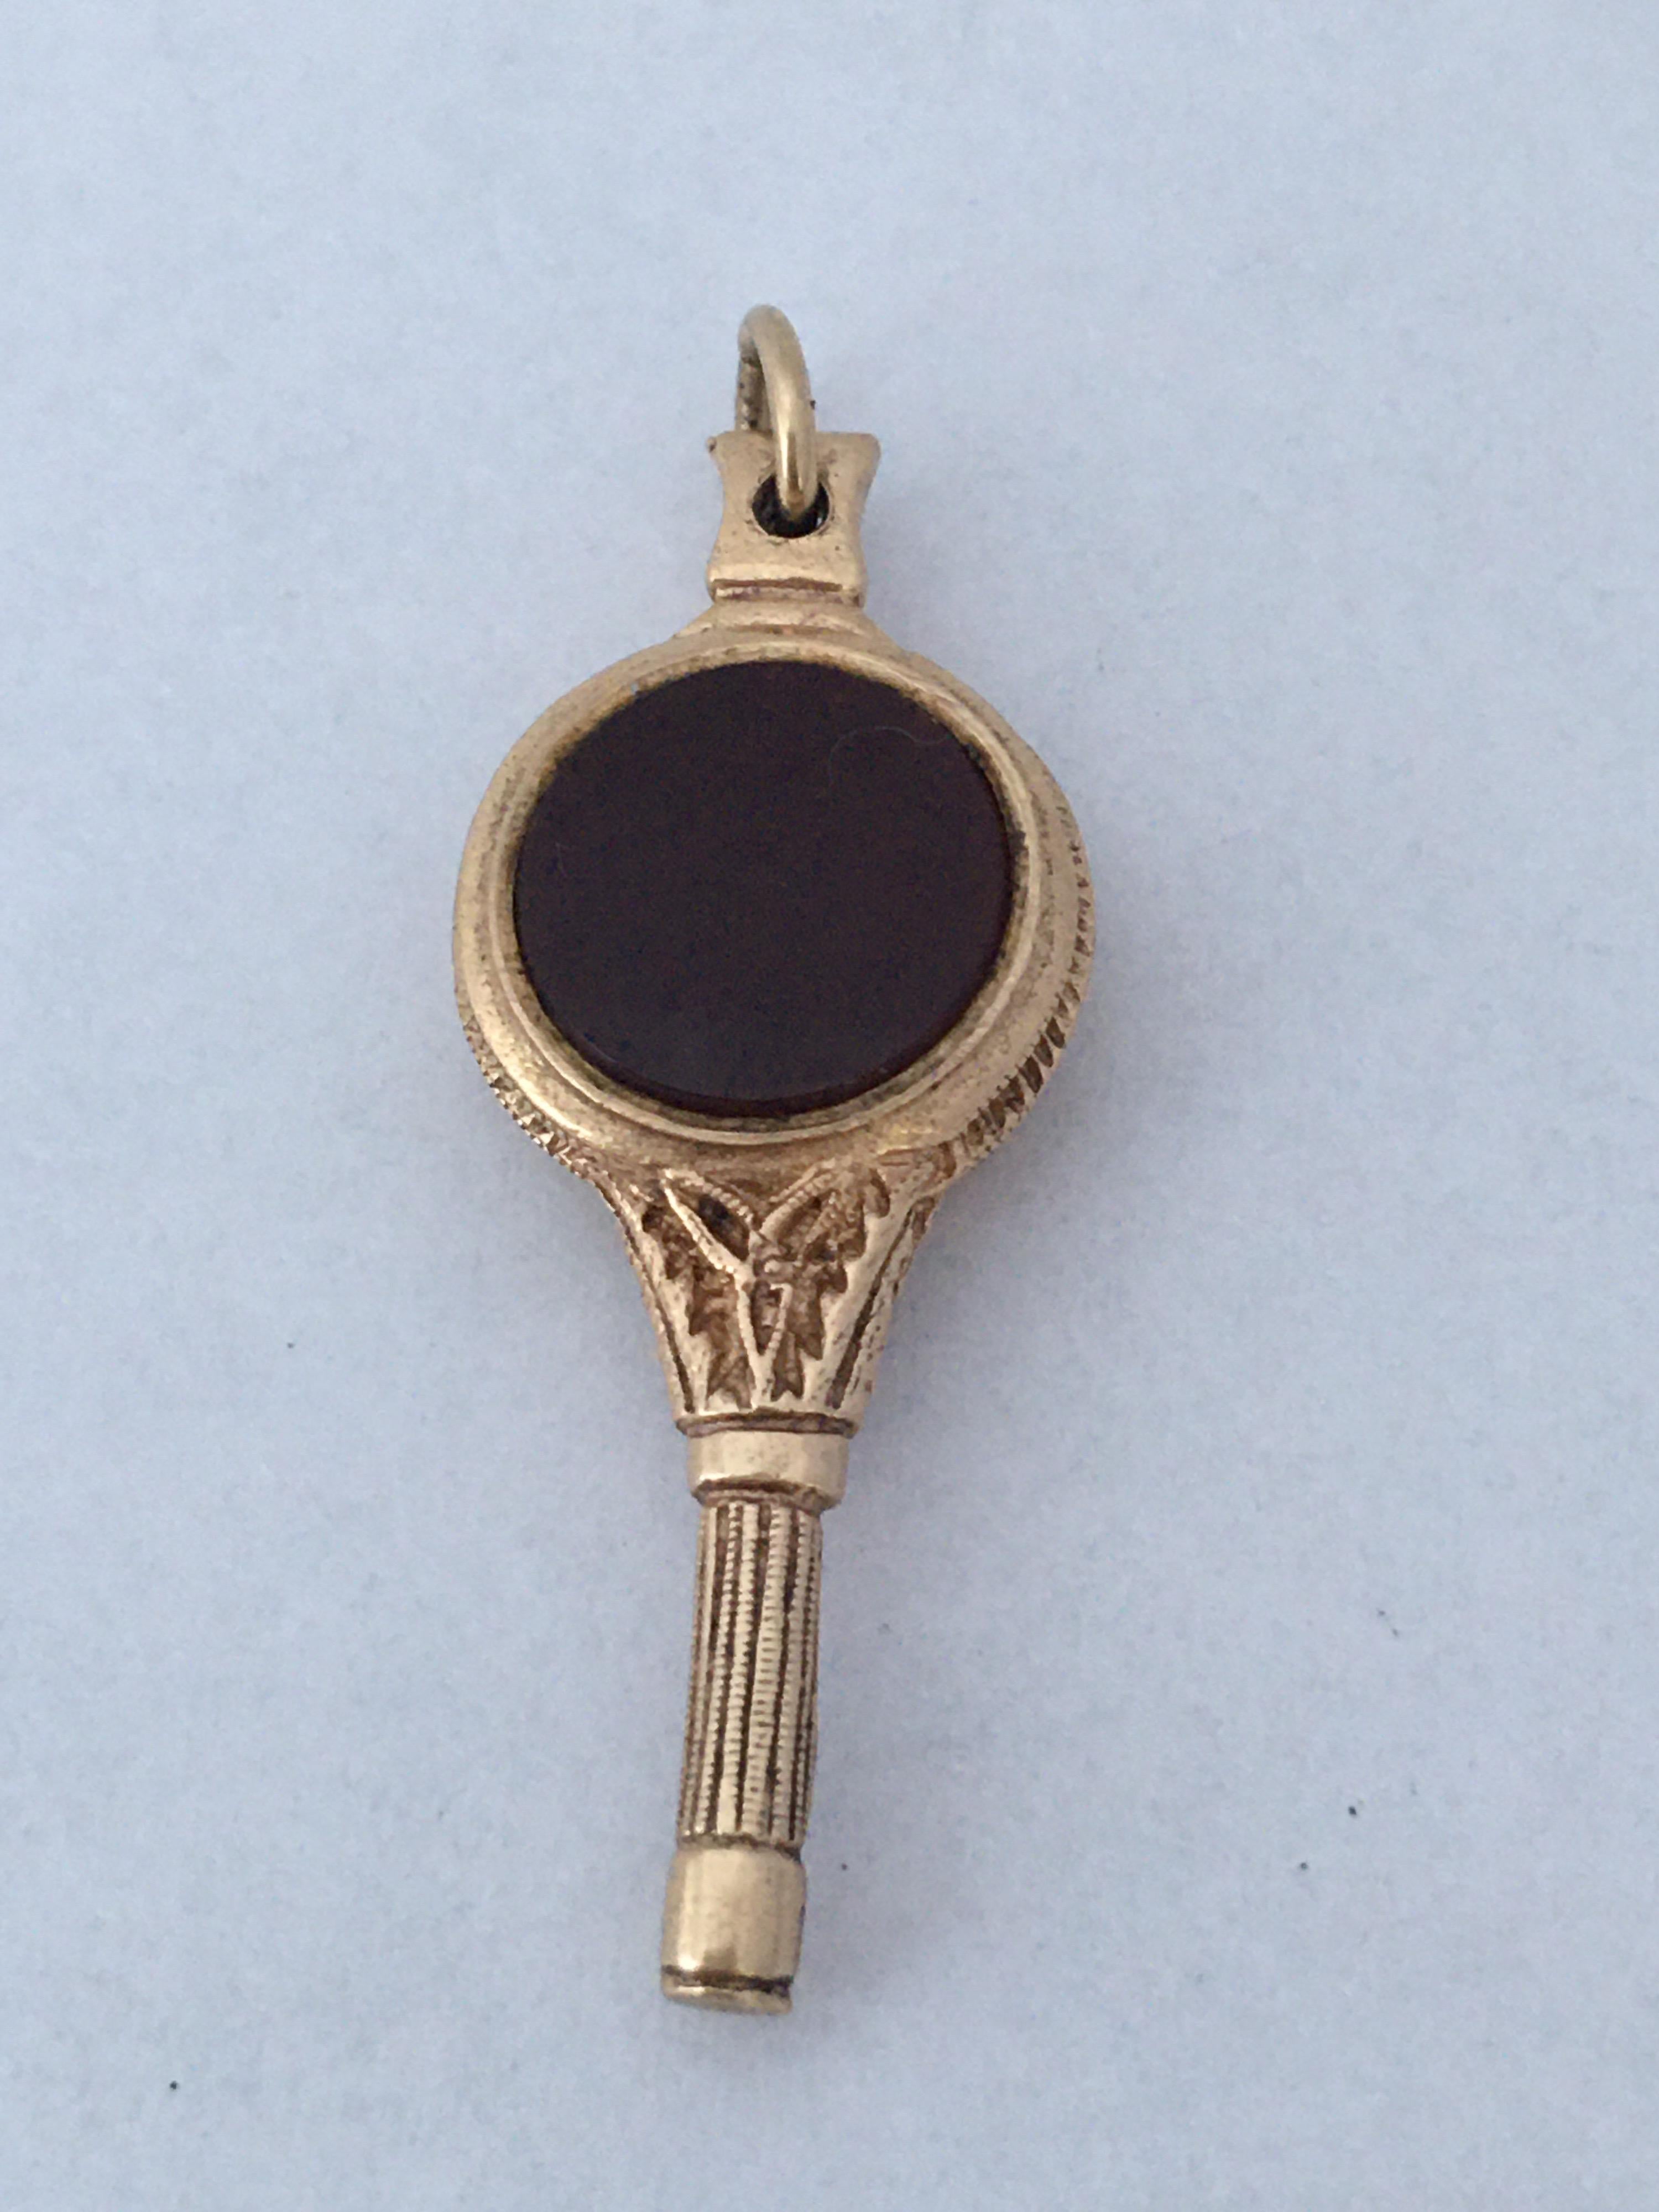 This beautiful antique ornate gold piece measured 33mm long and weigh 4.4 grams. This piece is in pre-owned condition with visible wear and has aged with also a bit bend on the bottom as shown.